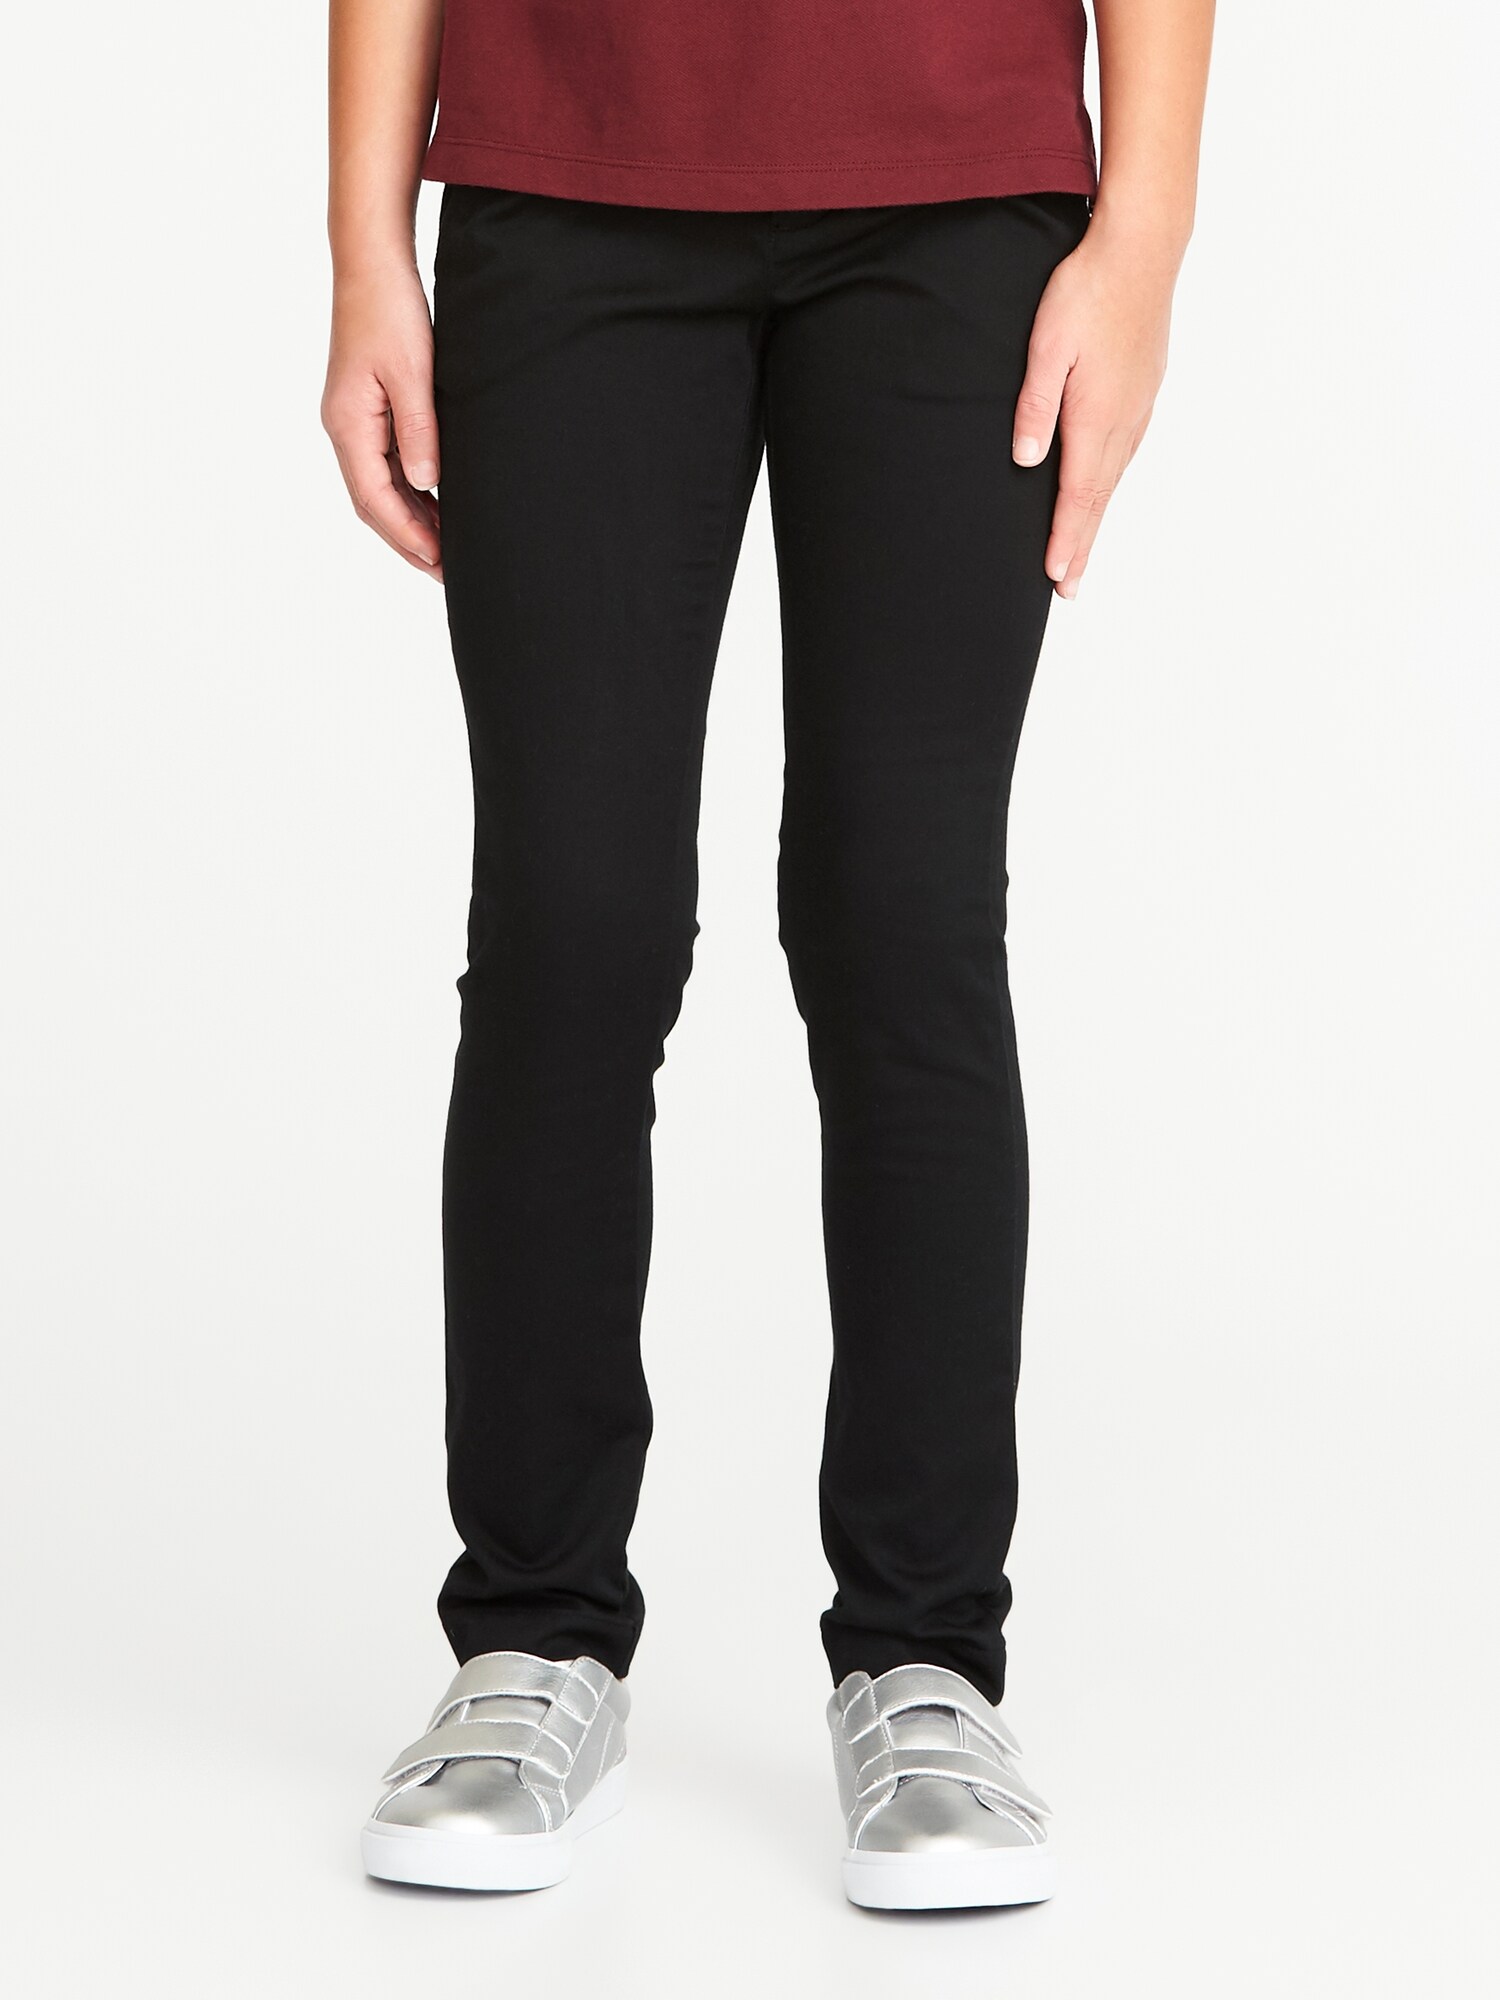 *Today Only Deal* Skinny Uniform Pants for Girls